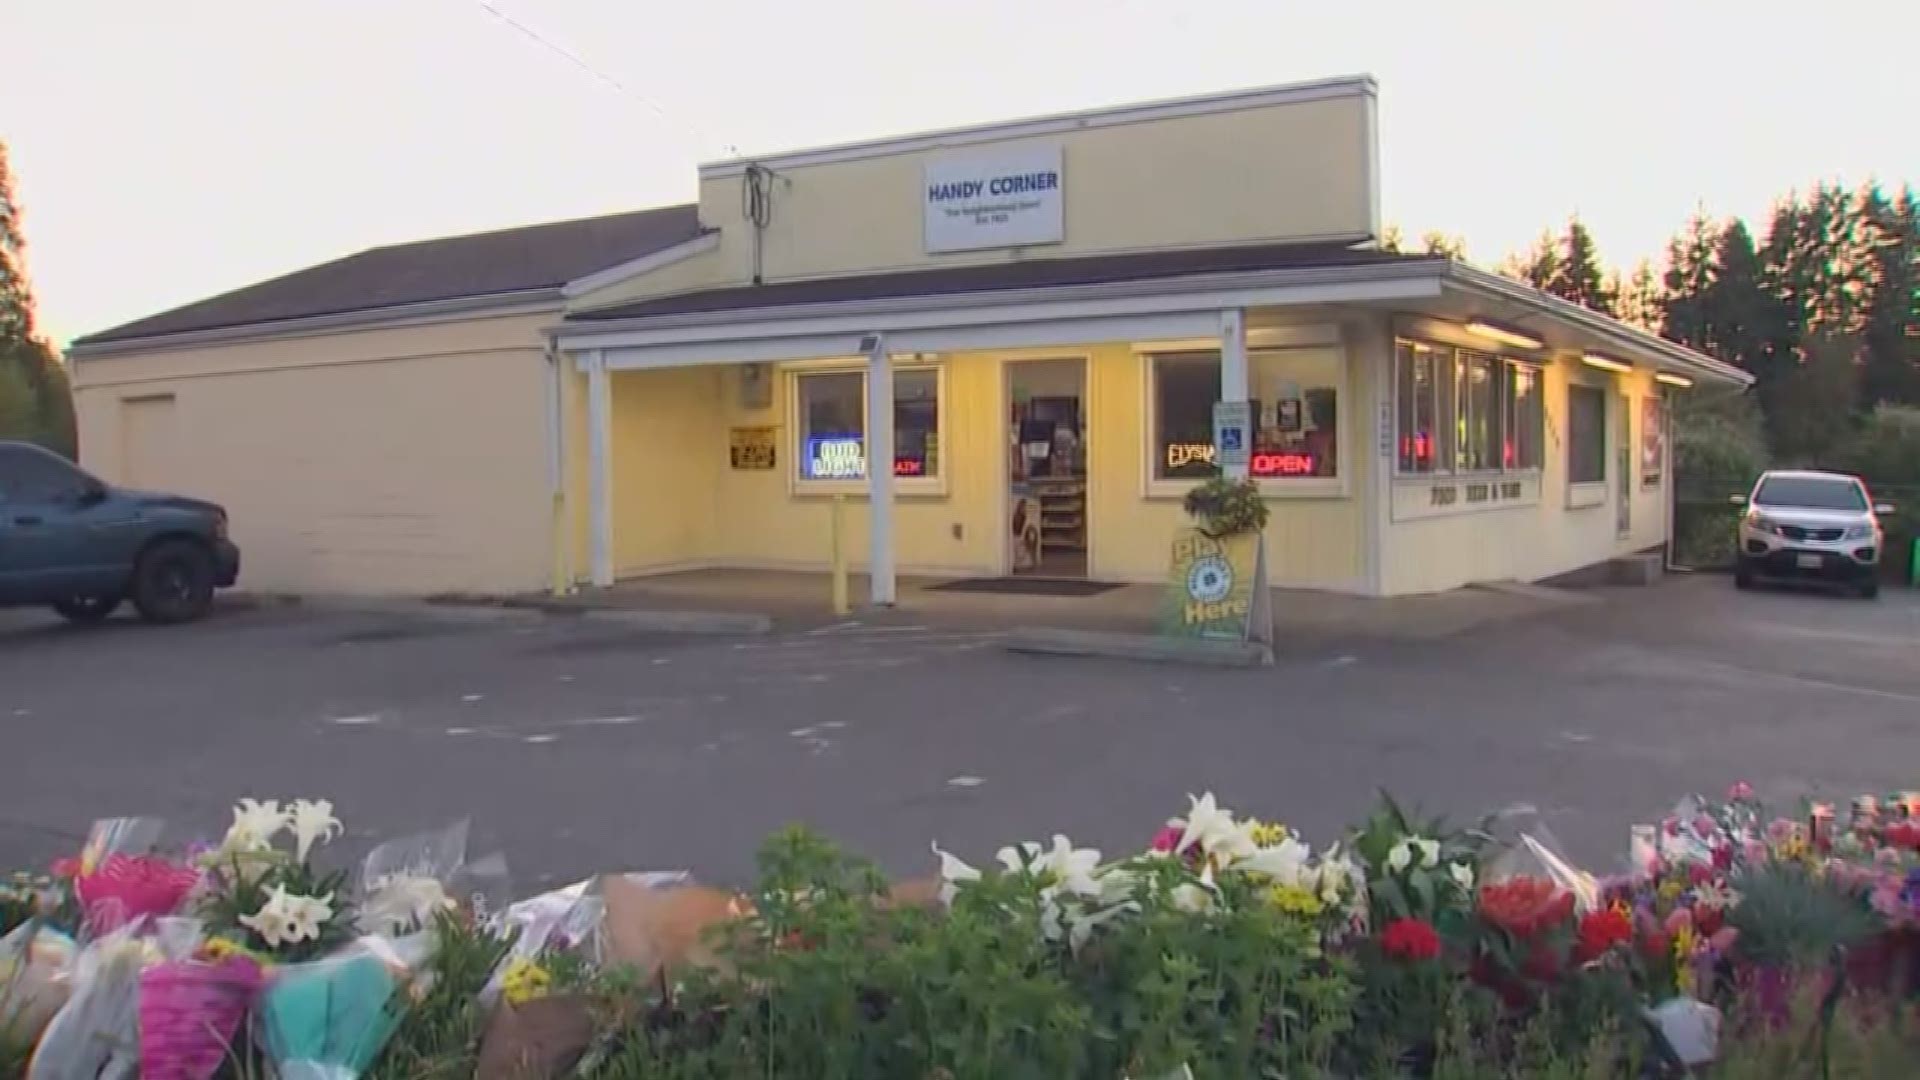 The city of Puyallup is mourning the loss of a beloved member of the community who was shot and killed during a robbery.